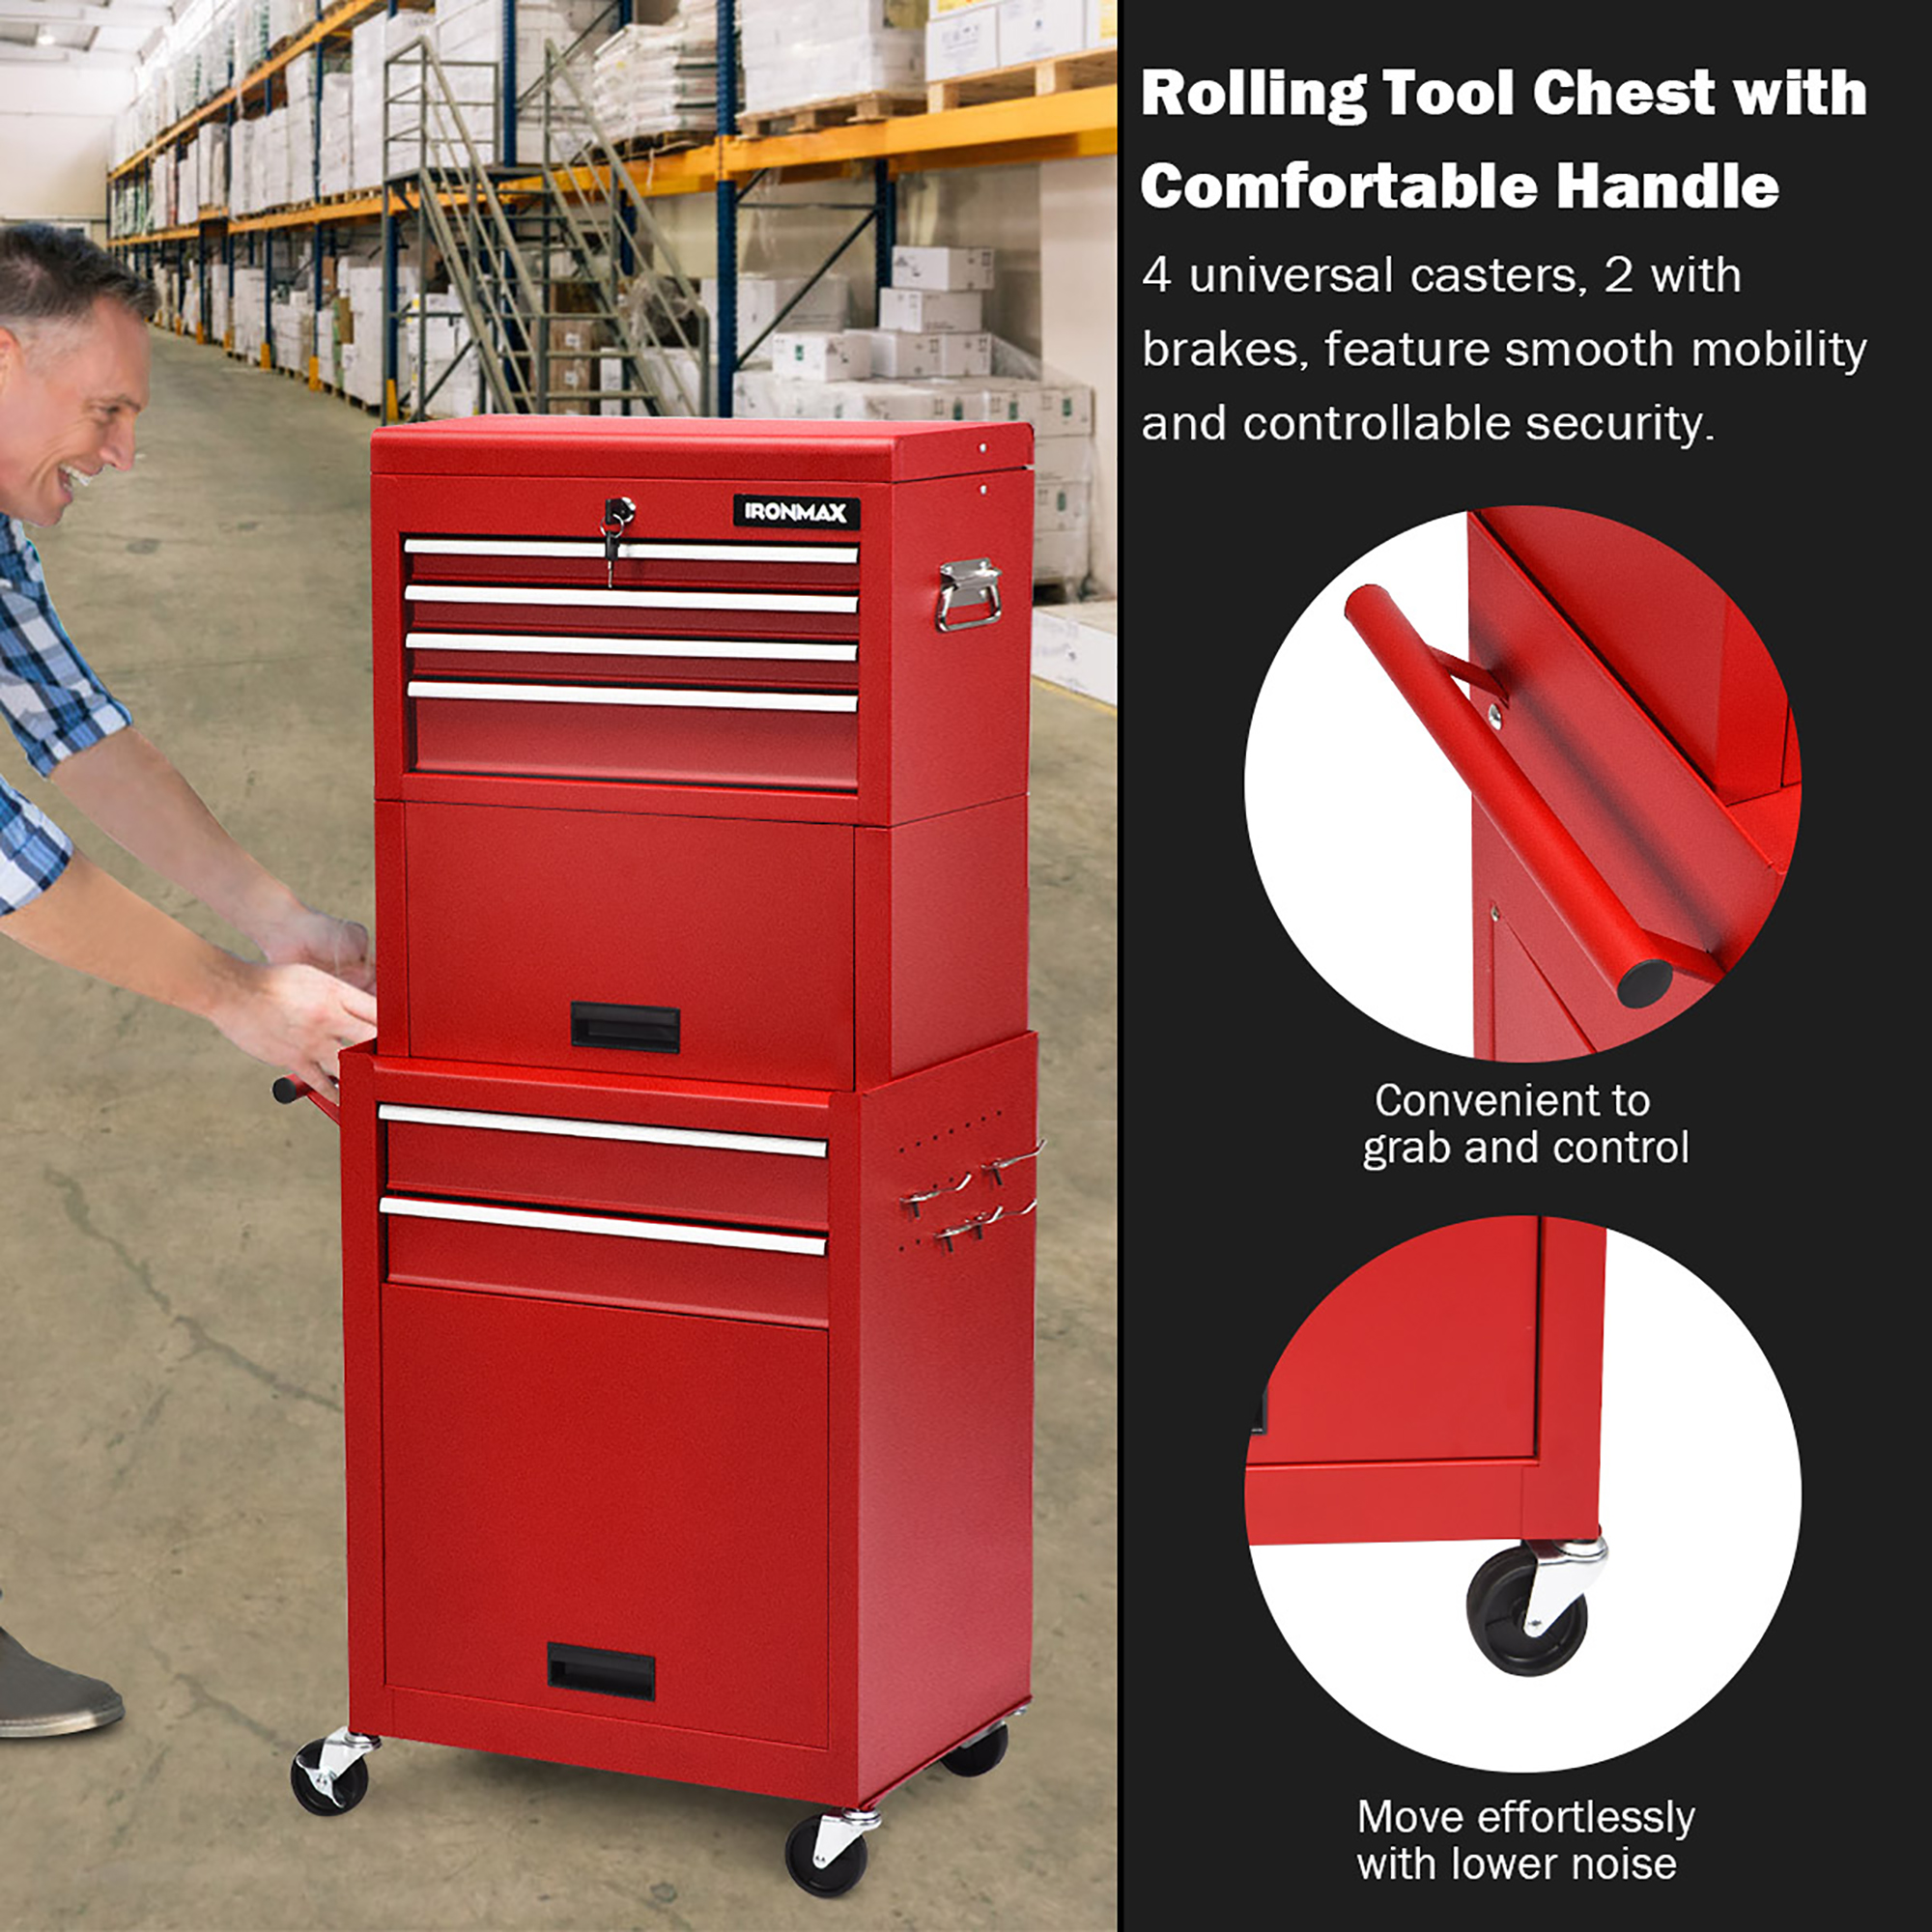 Costway 6-Drawer Rolling Tool Chest Storage Cabinet w/Riser Red